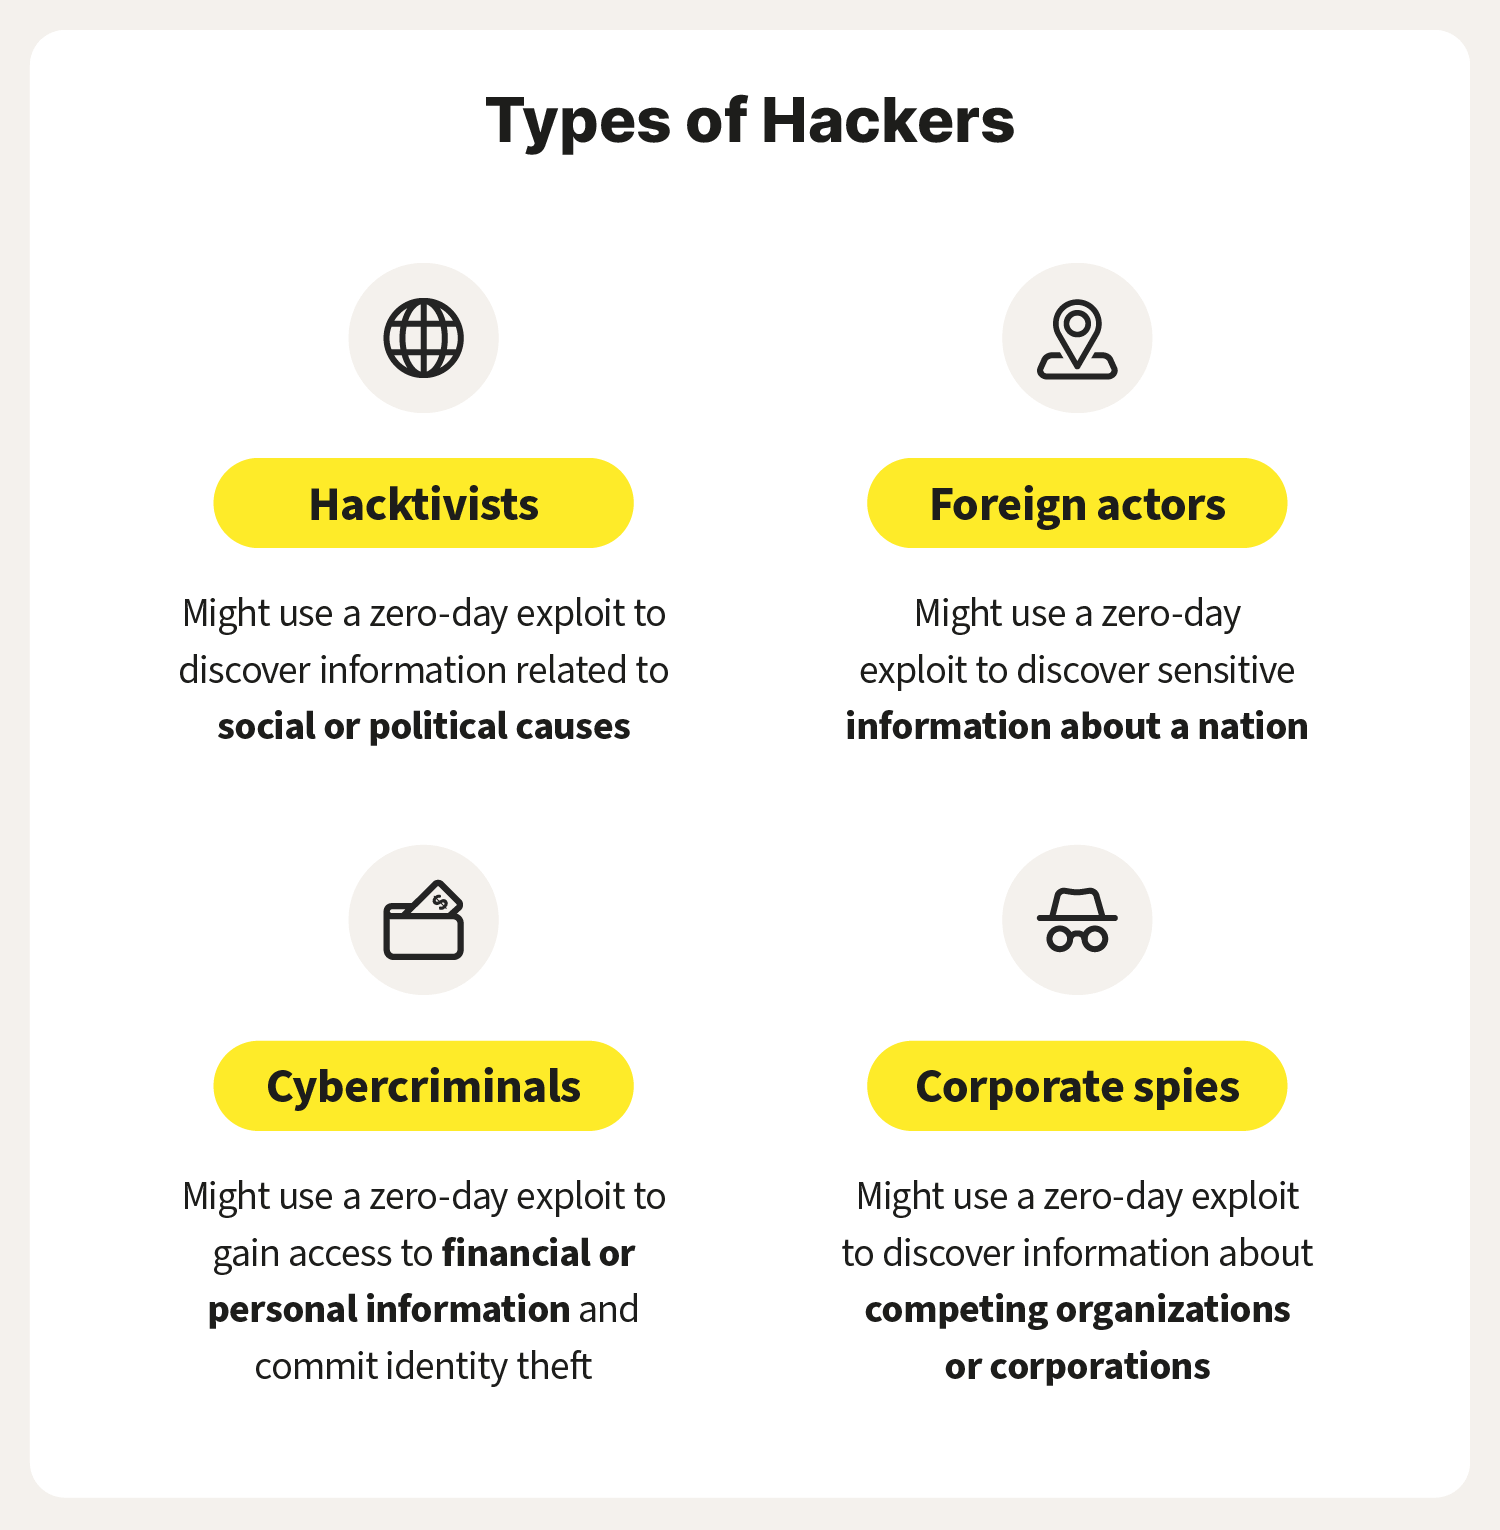 A graphic explains the different types of hackers that may use zero-day exploits.